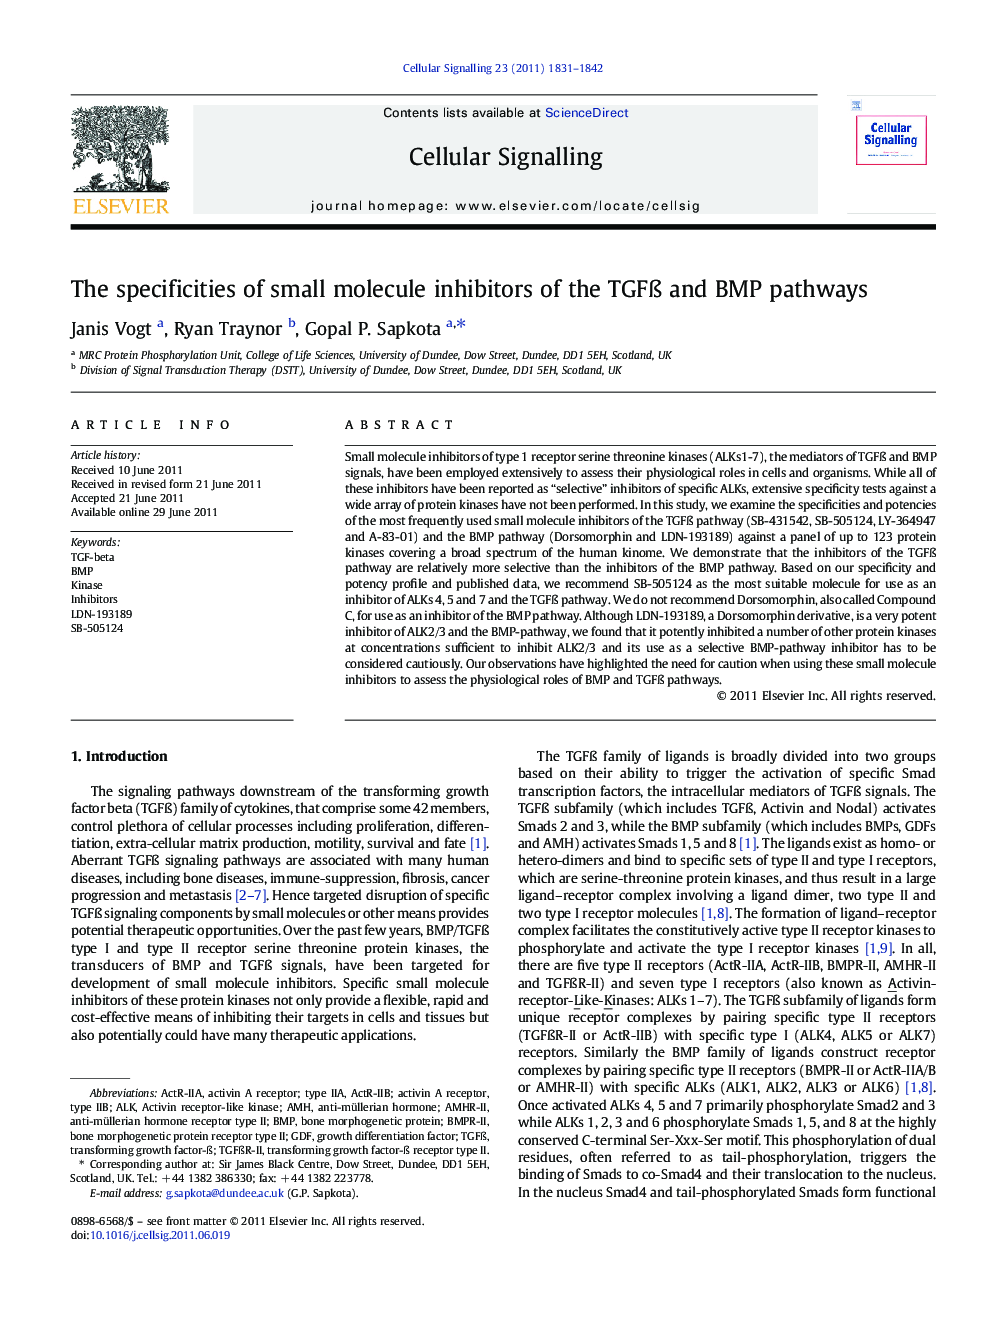 The specificities of small molecule inhibitors of the TGFß and BMP pathways